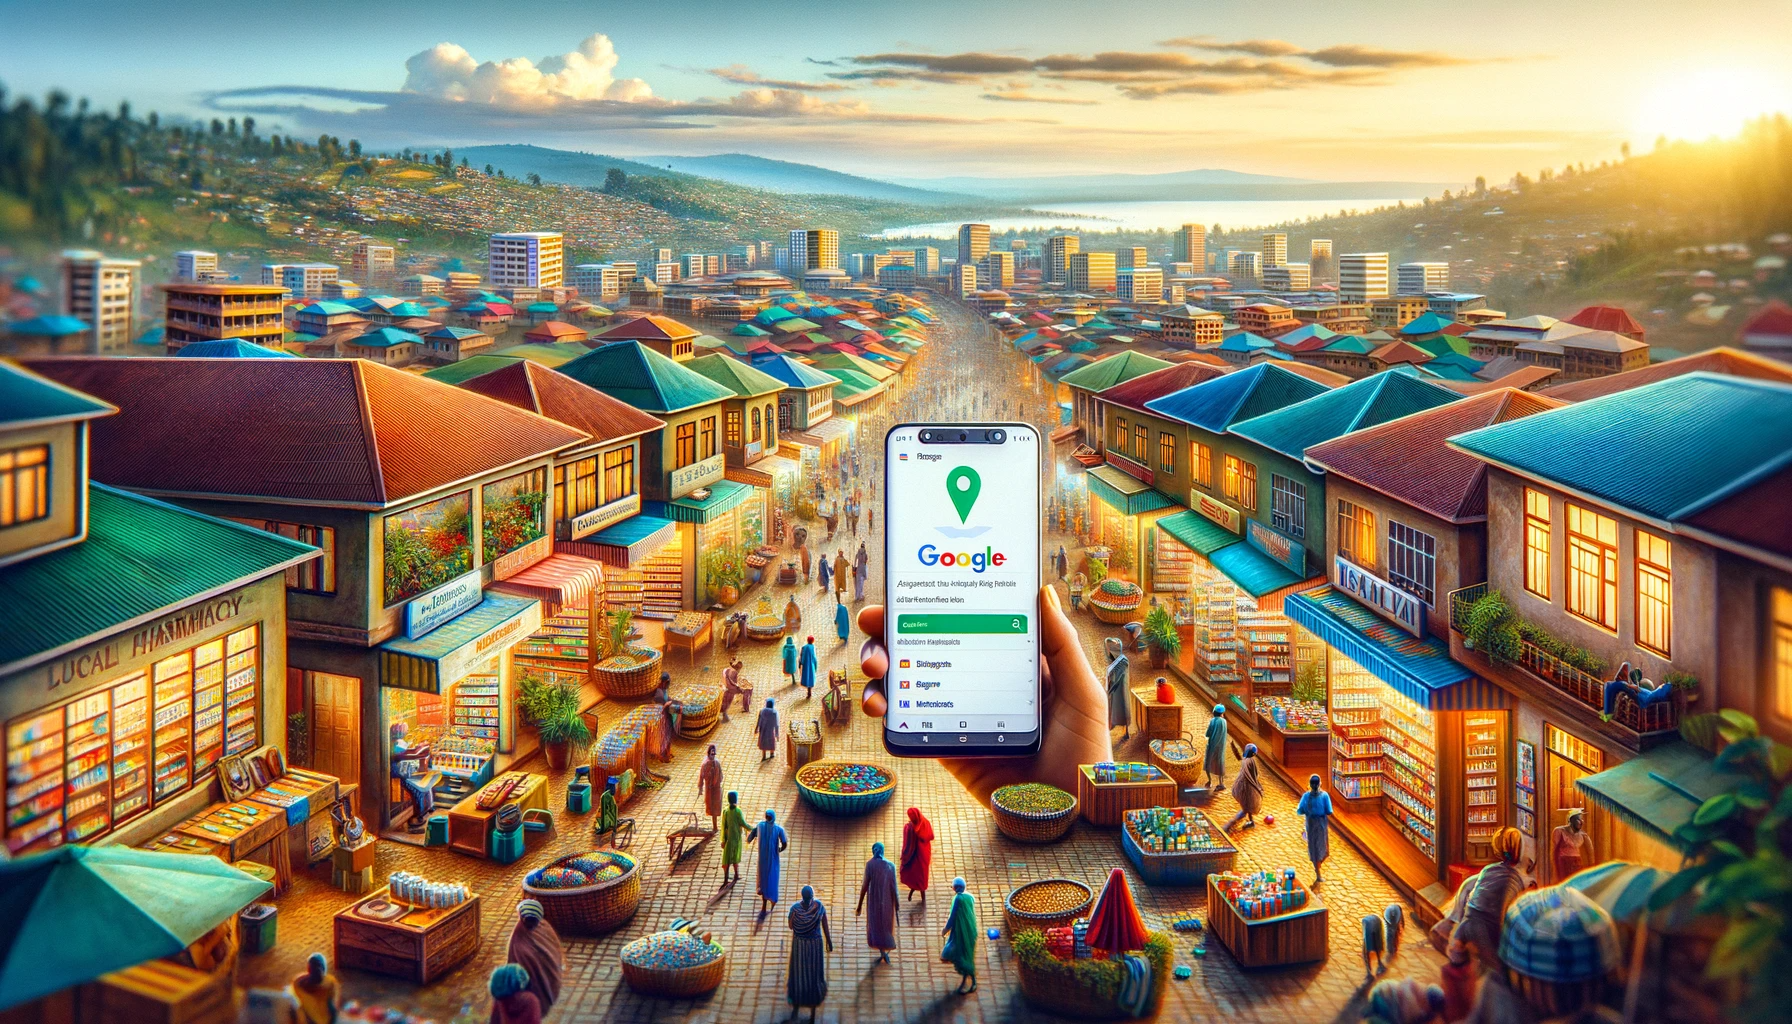 This image illustrates a bustling marketplace in Kigali, Rwanda, highlighting a modern pharmacy that stands out with its bright façade, along with the inclusion of a smartphone displaying an accurate Google My Business profile.